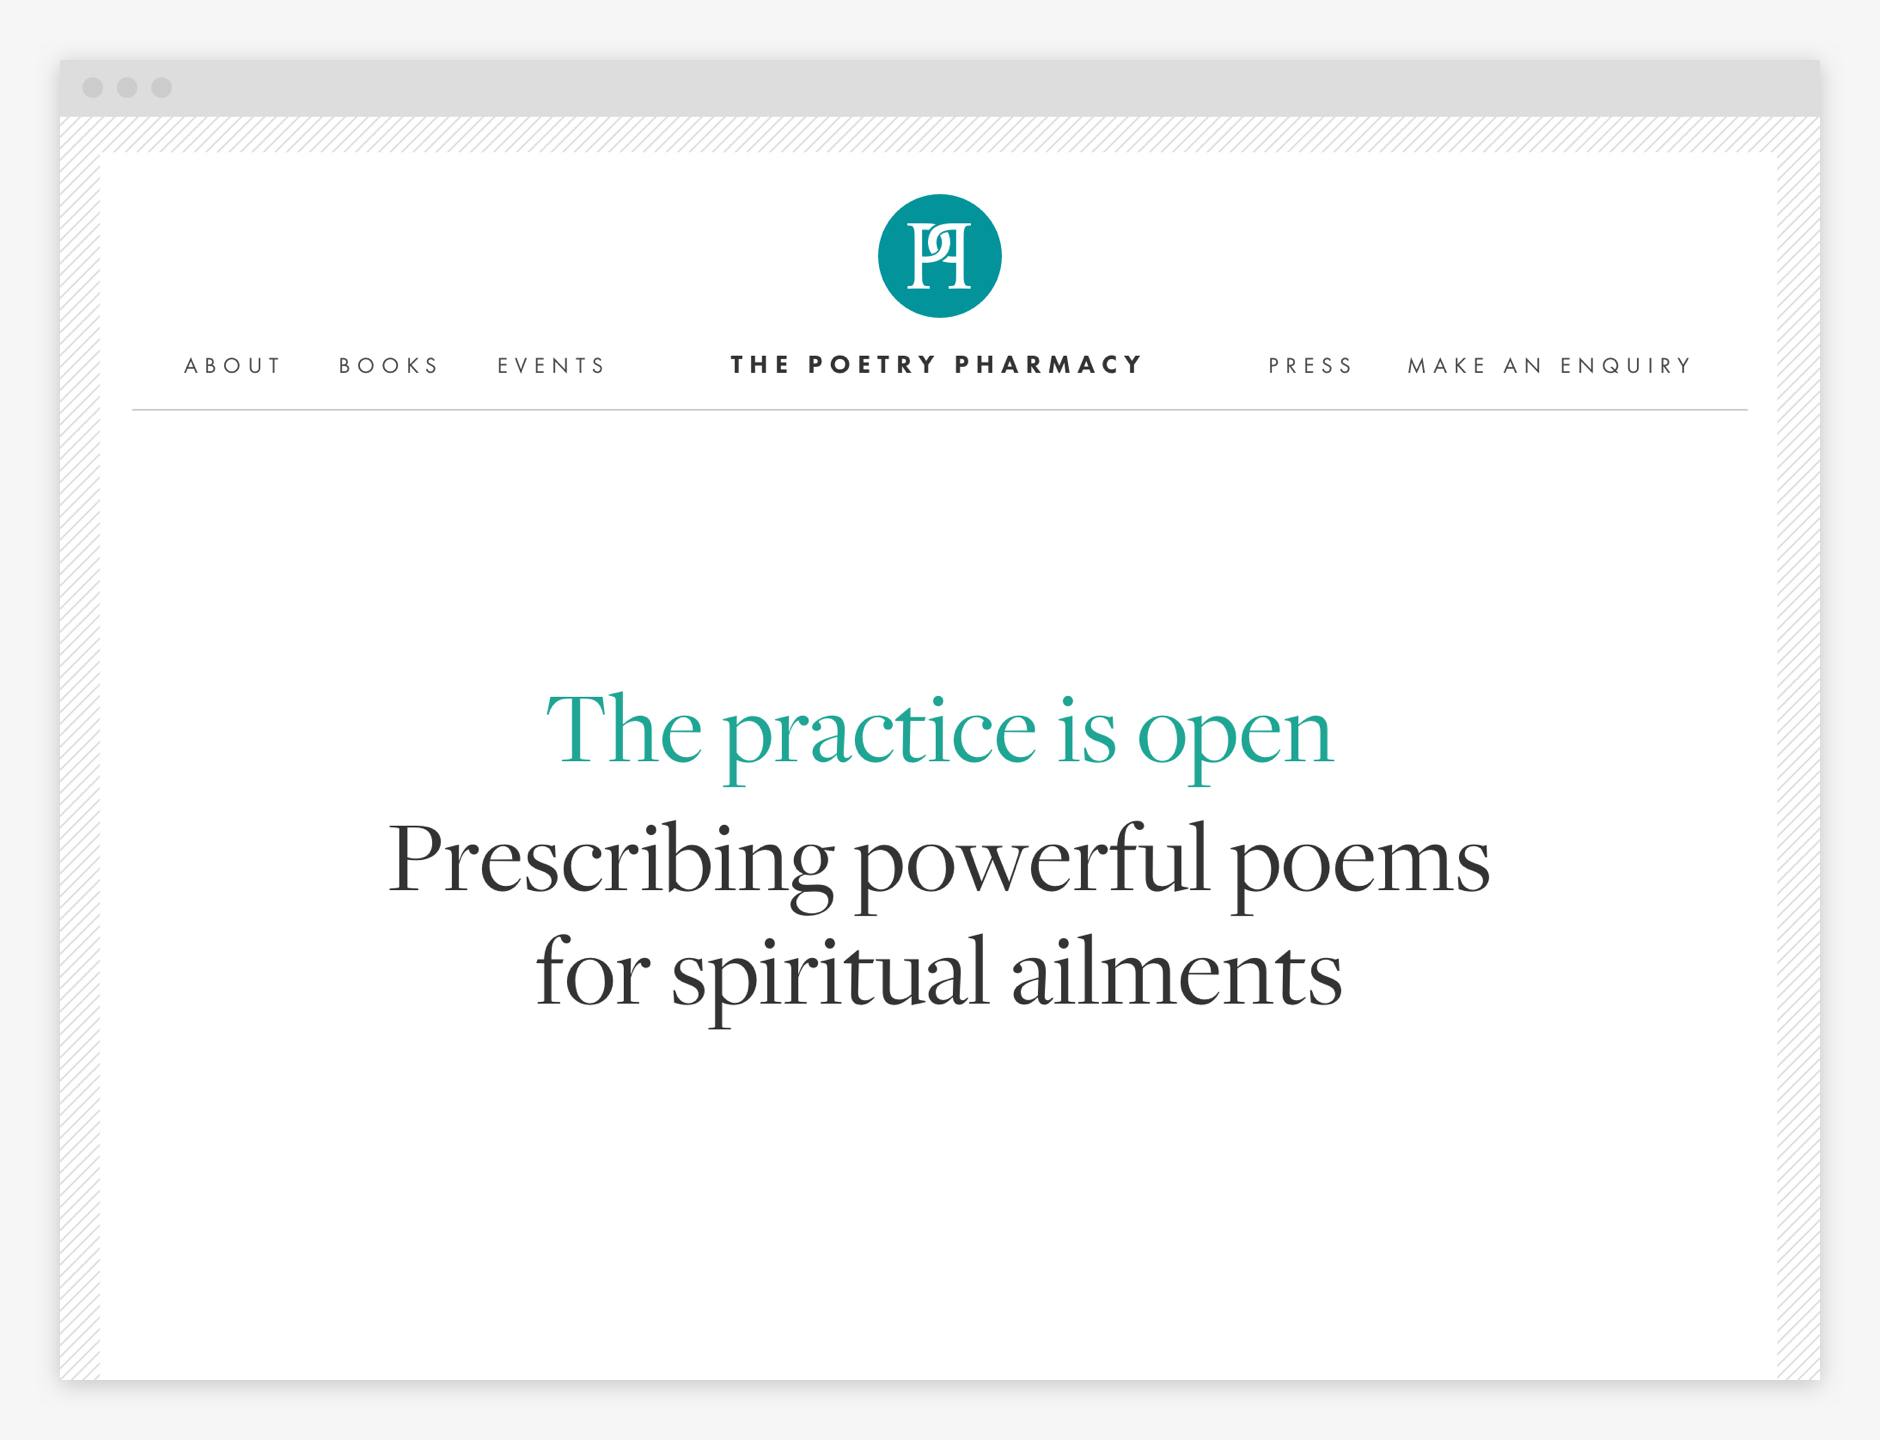 Homepage: The practice is now open. Prescribing powerful poems for spiritual ailments.